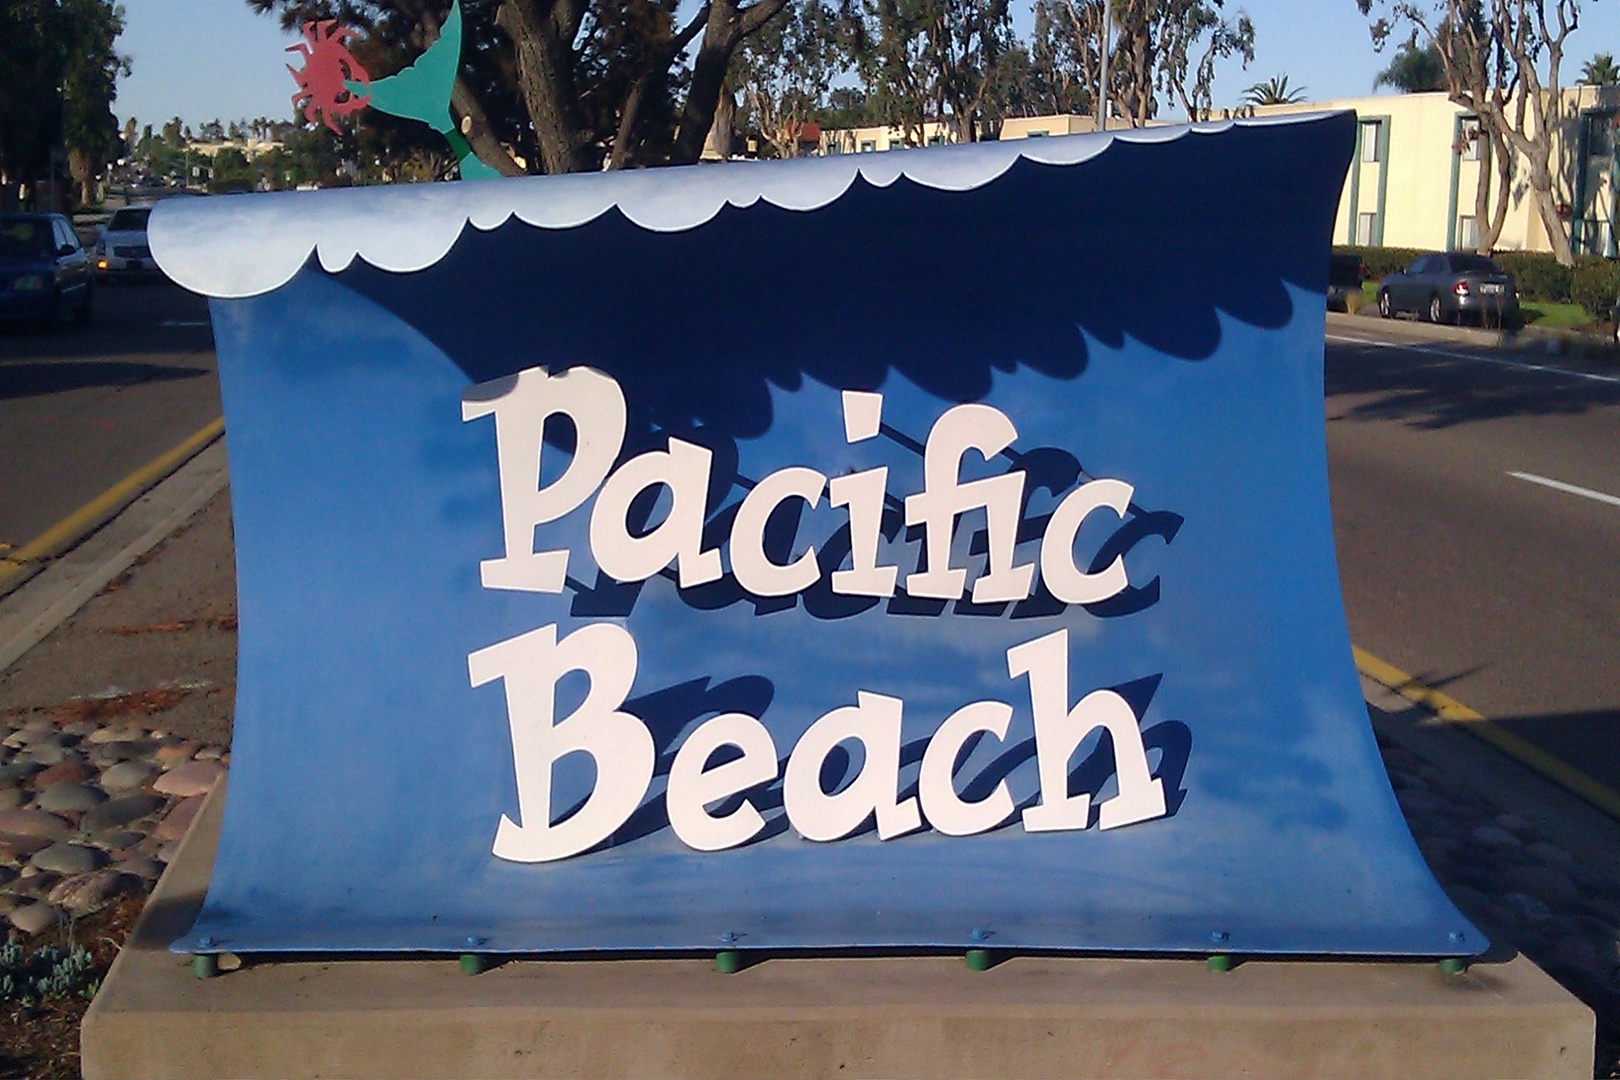 Time to vacation in Pacific Beach!